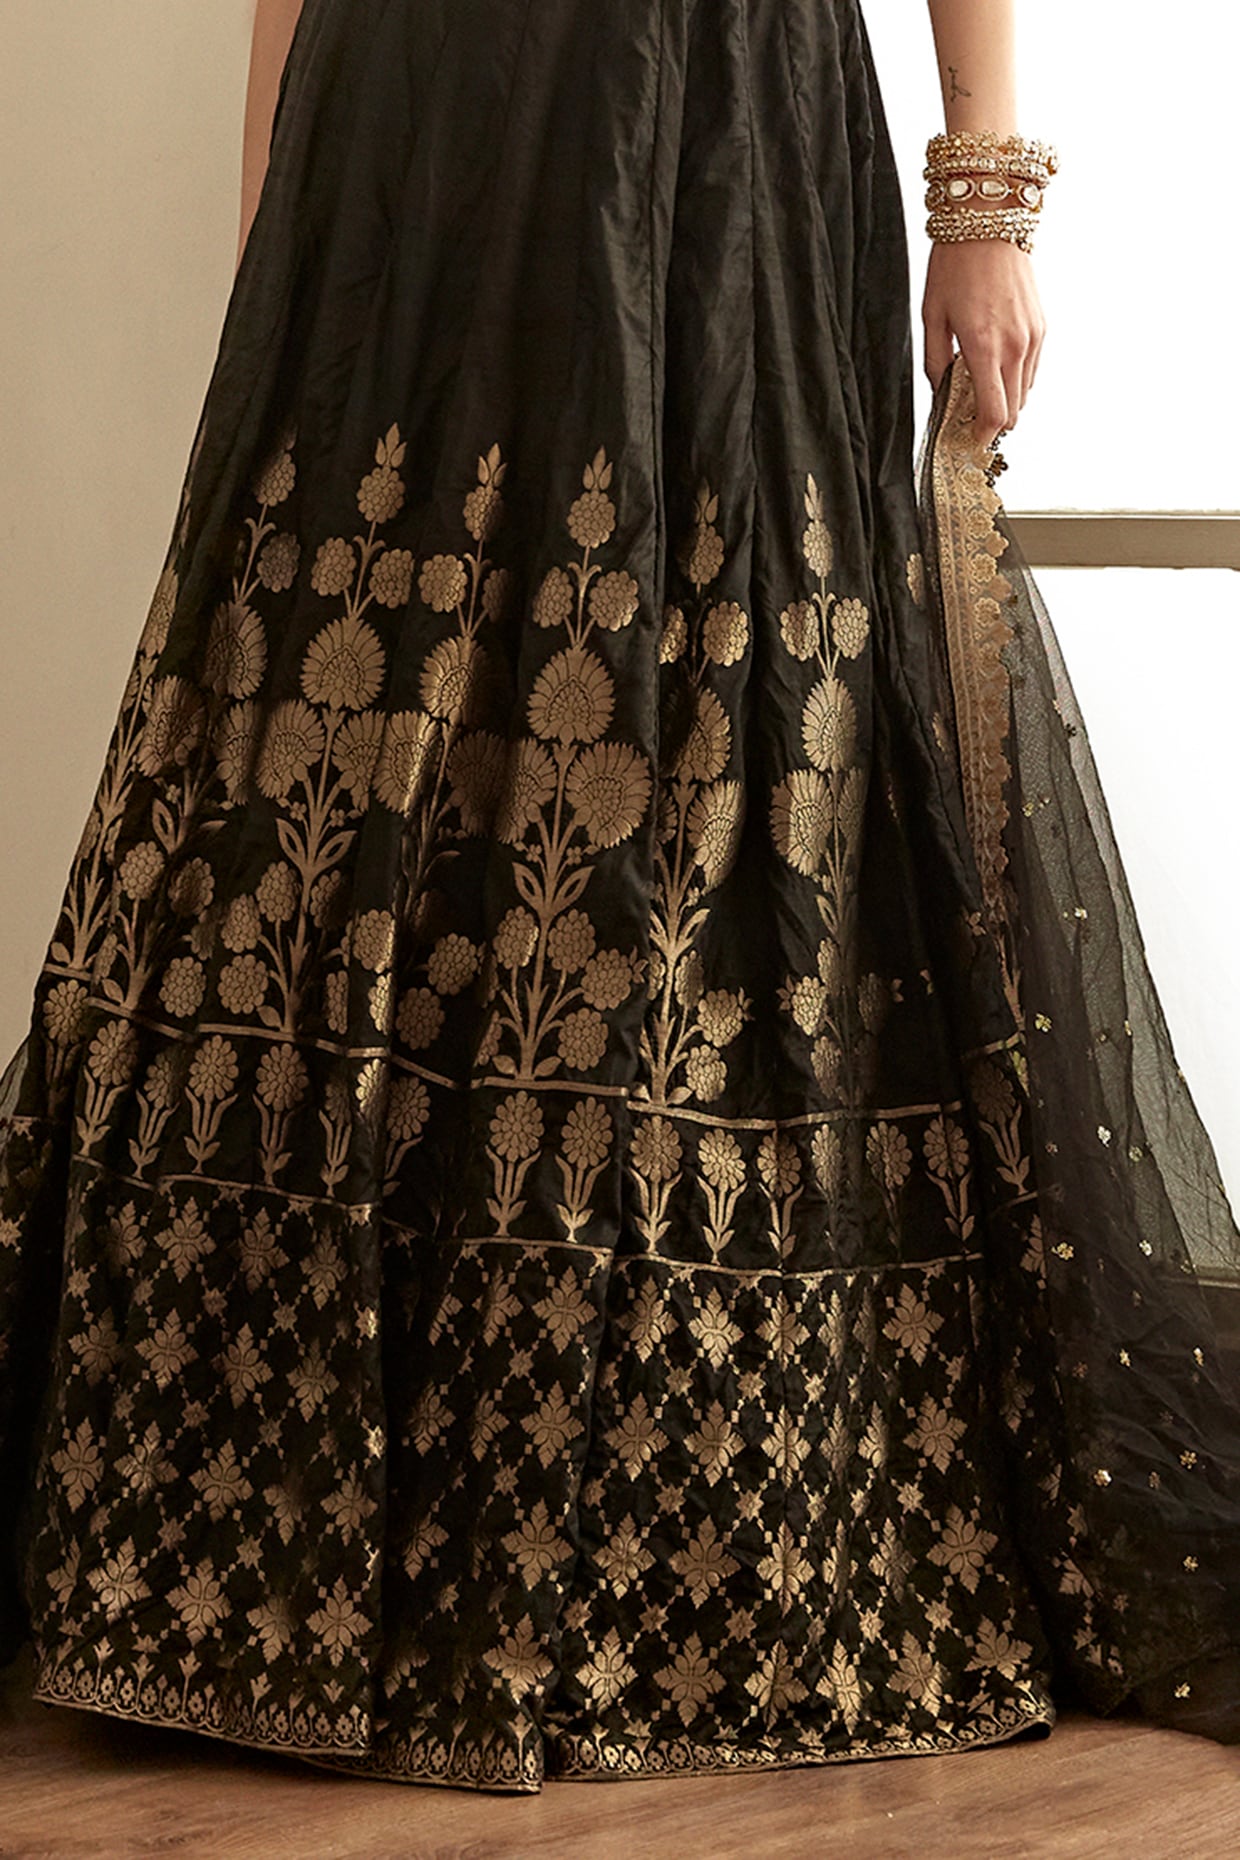 Black And Gold Lehenga Design Ideas For The Bride To Be!